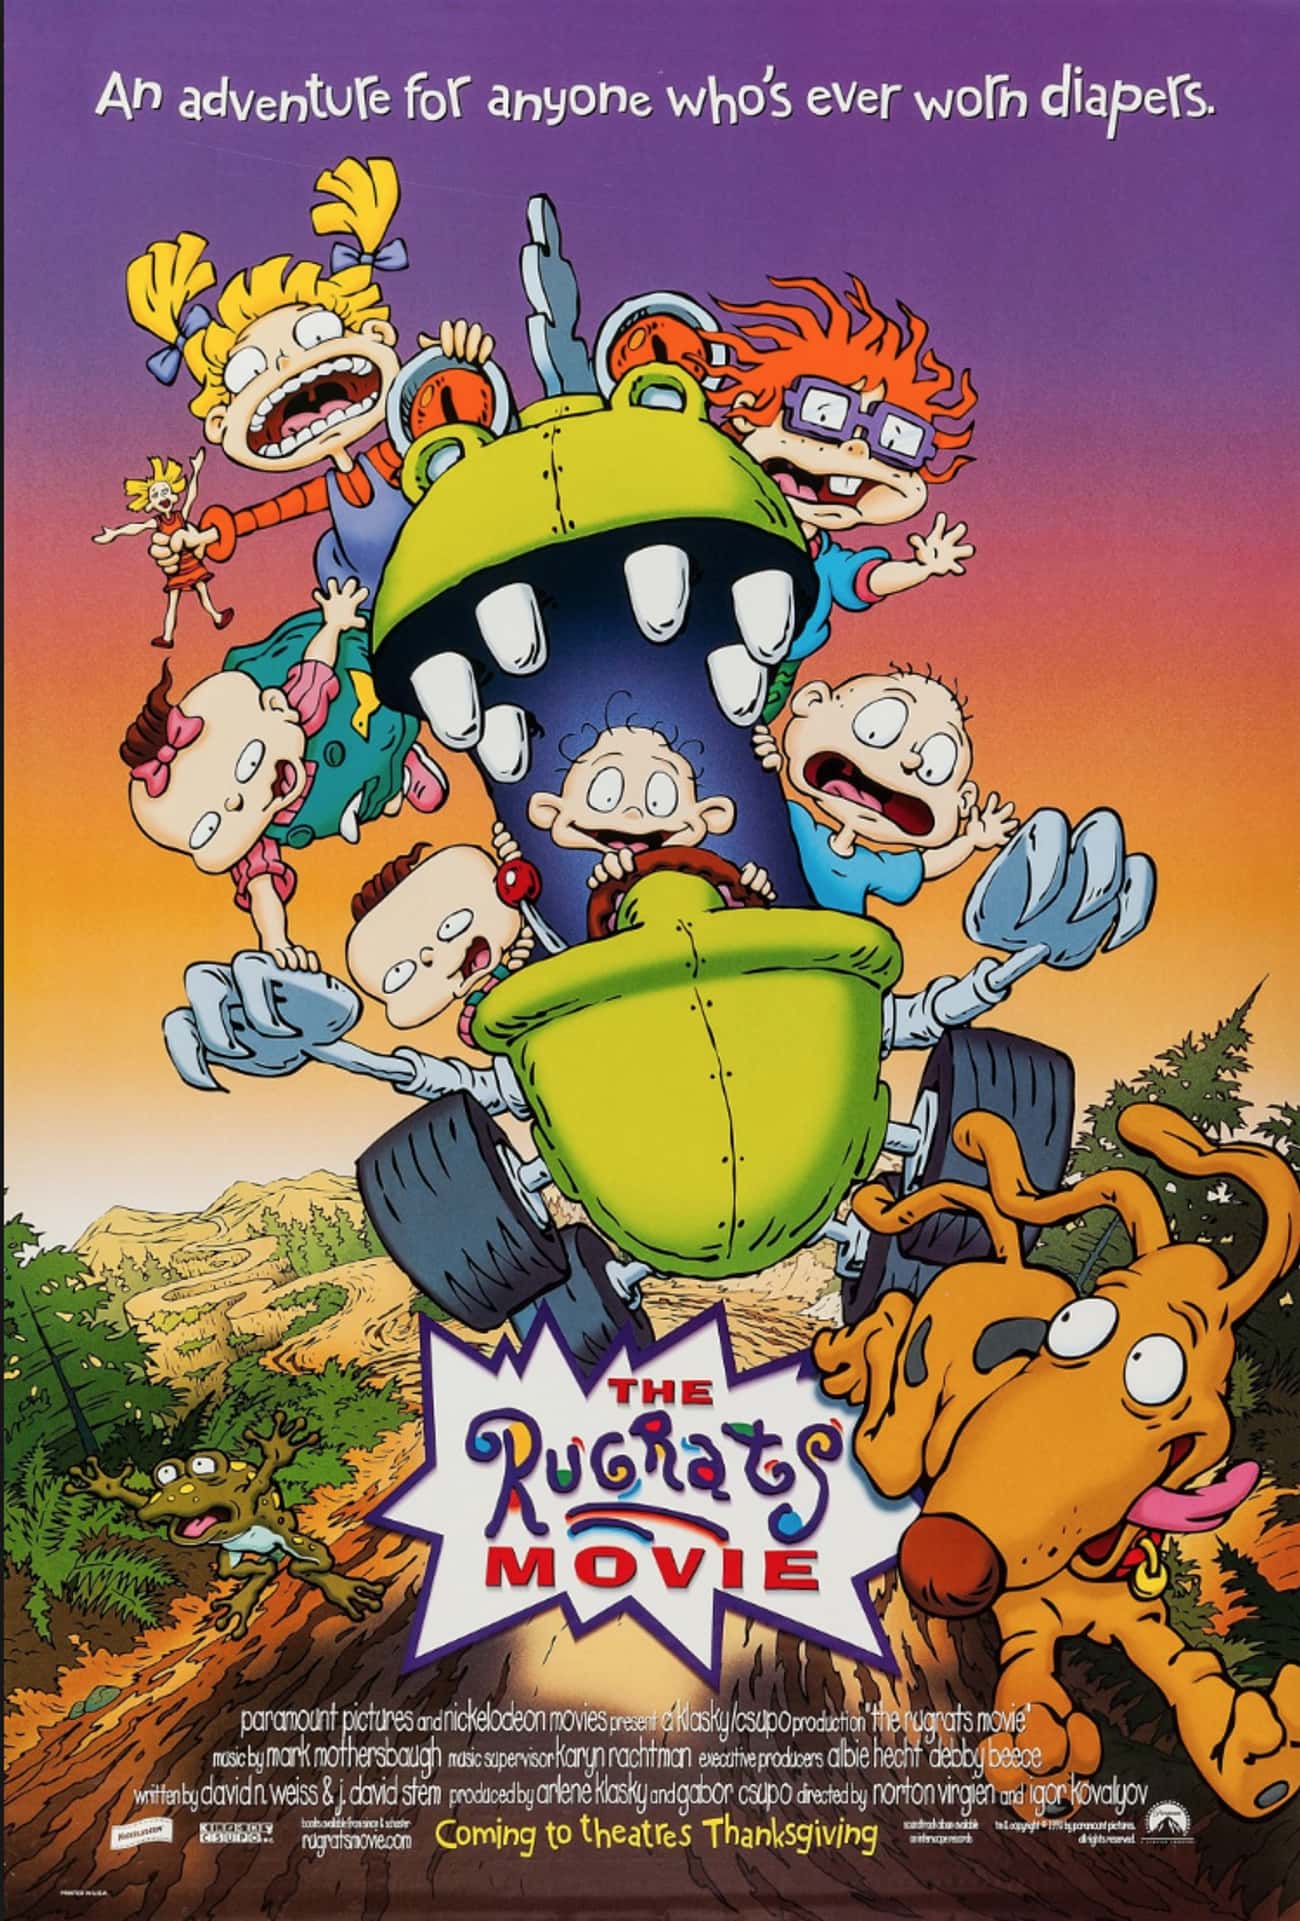 The Rugrats Movie Was the First Animated Movie to Gross More Than Disney